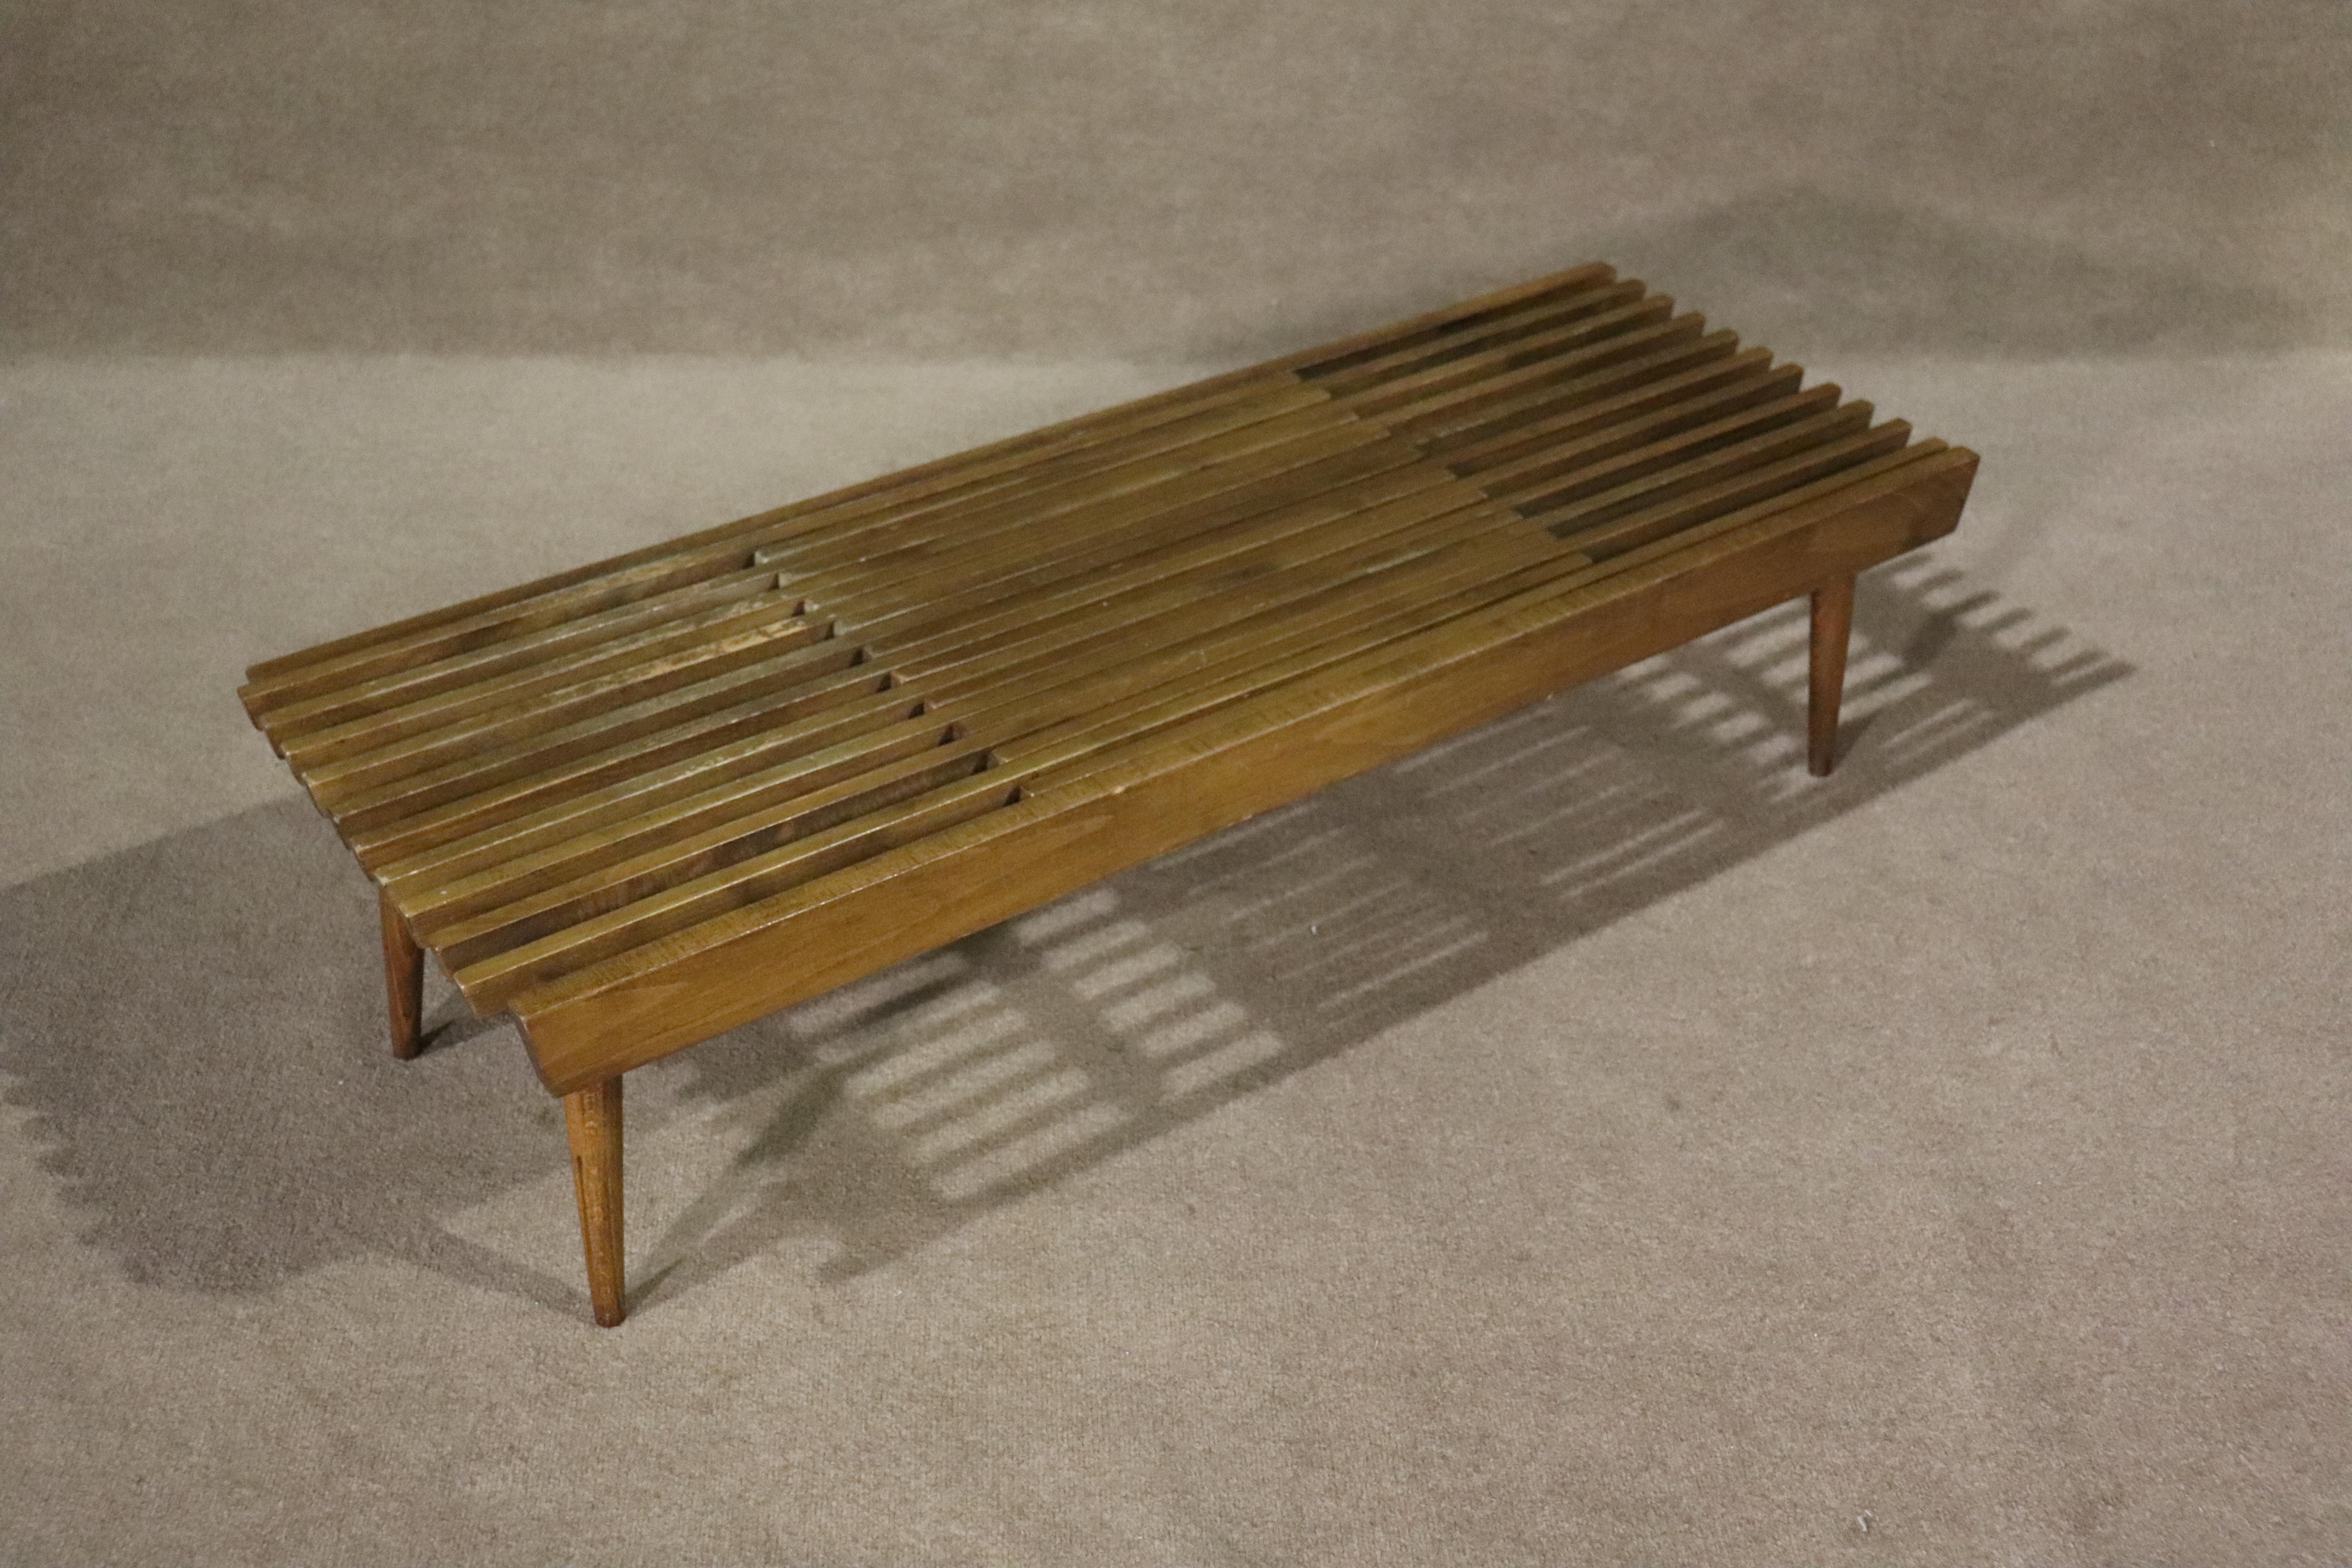 Mid-century modern slat table that extends with two sides. Can be used as a coffee table or entry bench.
Please confirm location NY or NJ